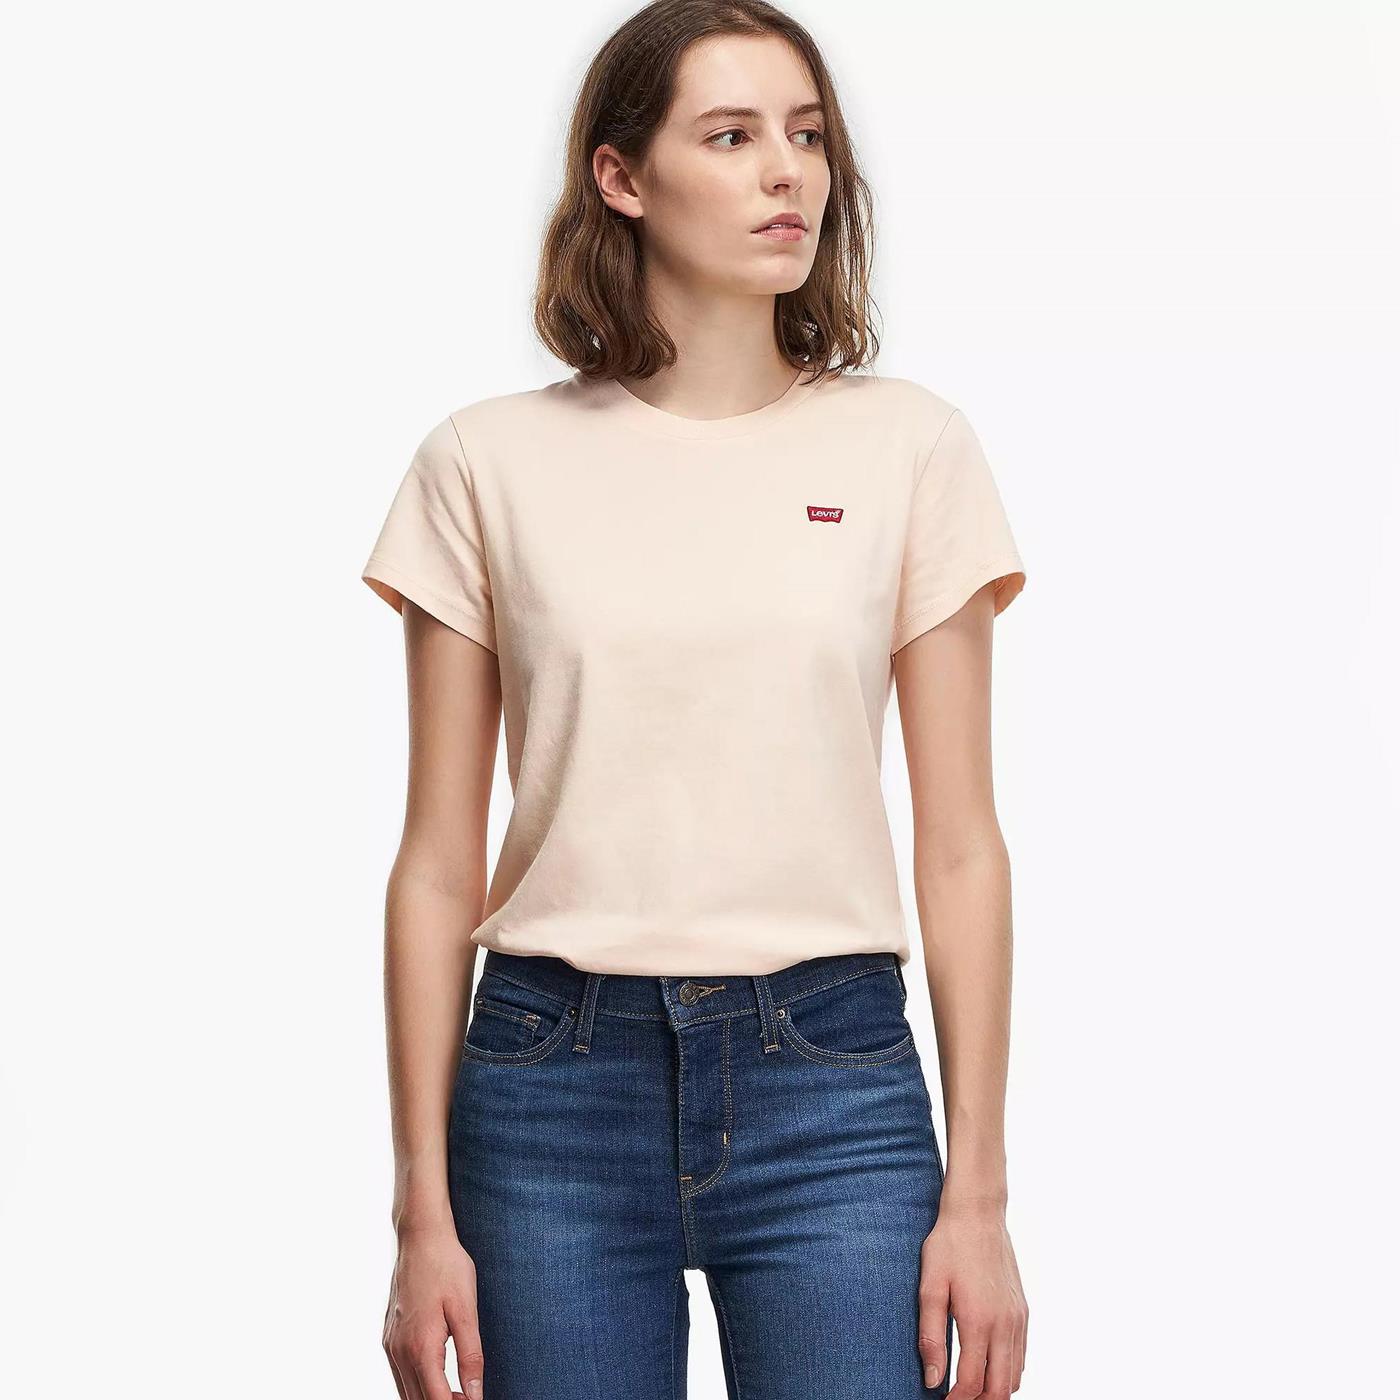 T-Shirt Levis Perfect Tee Pink for Woman | 39185-0165 | XTREME.PT